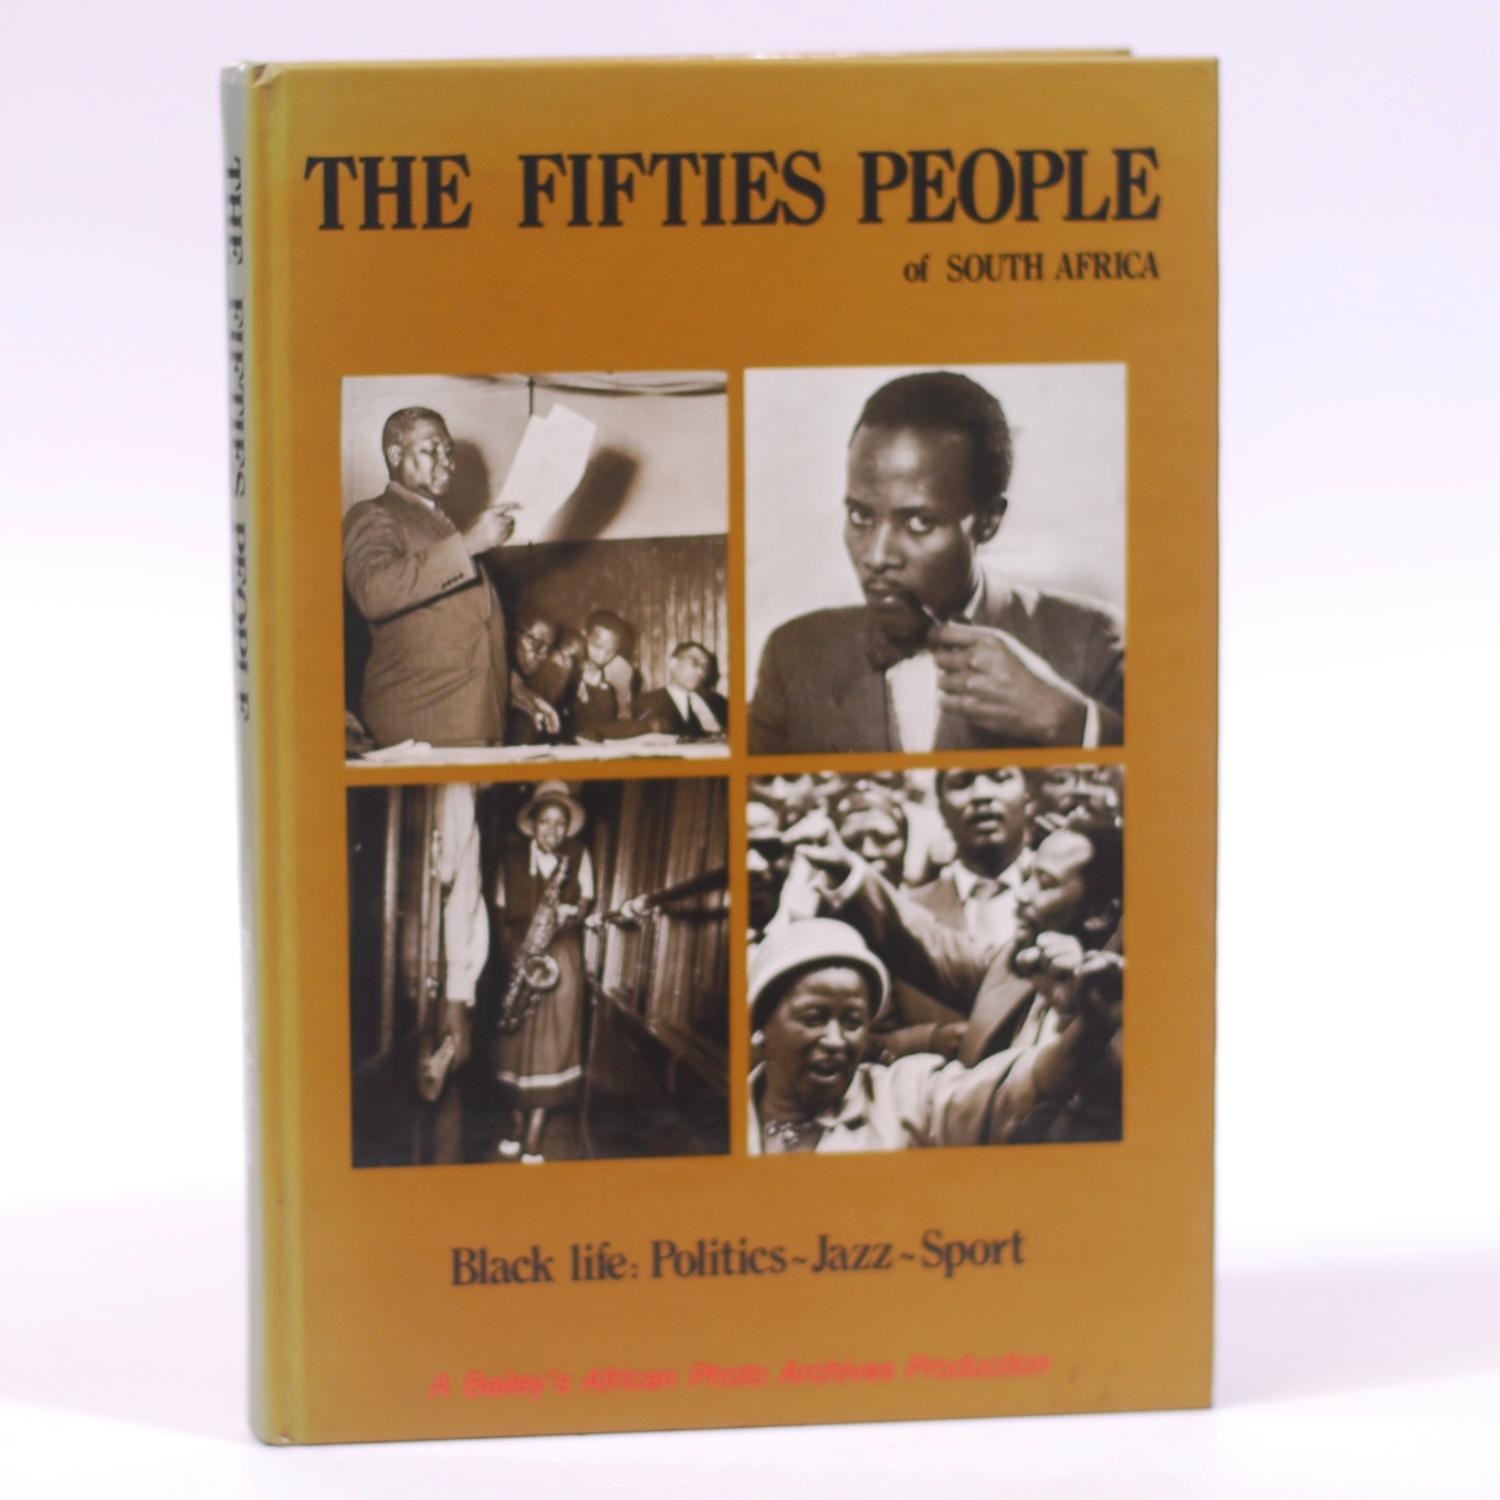 The Fifties People of South Africa. The lives of some ninety-five people who were influential in South Africa during the fifties, a period which saw the first stirrings of the coming revolution. - Schareberg, Jurgen